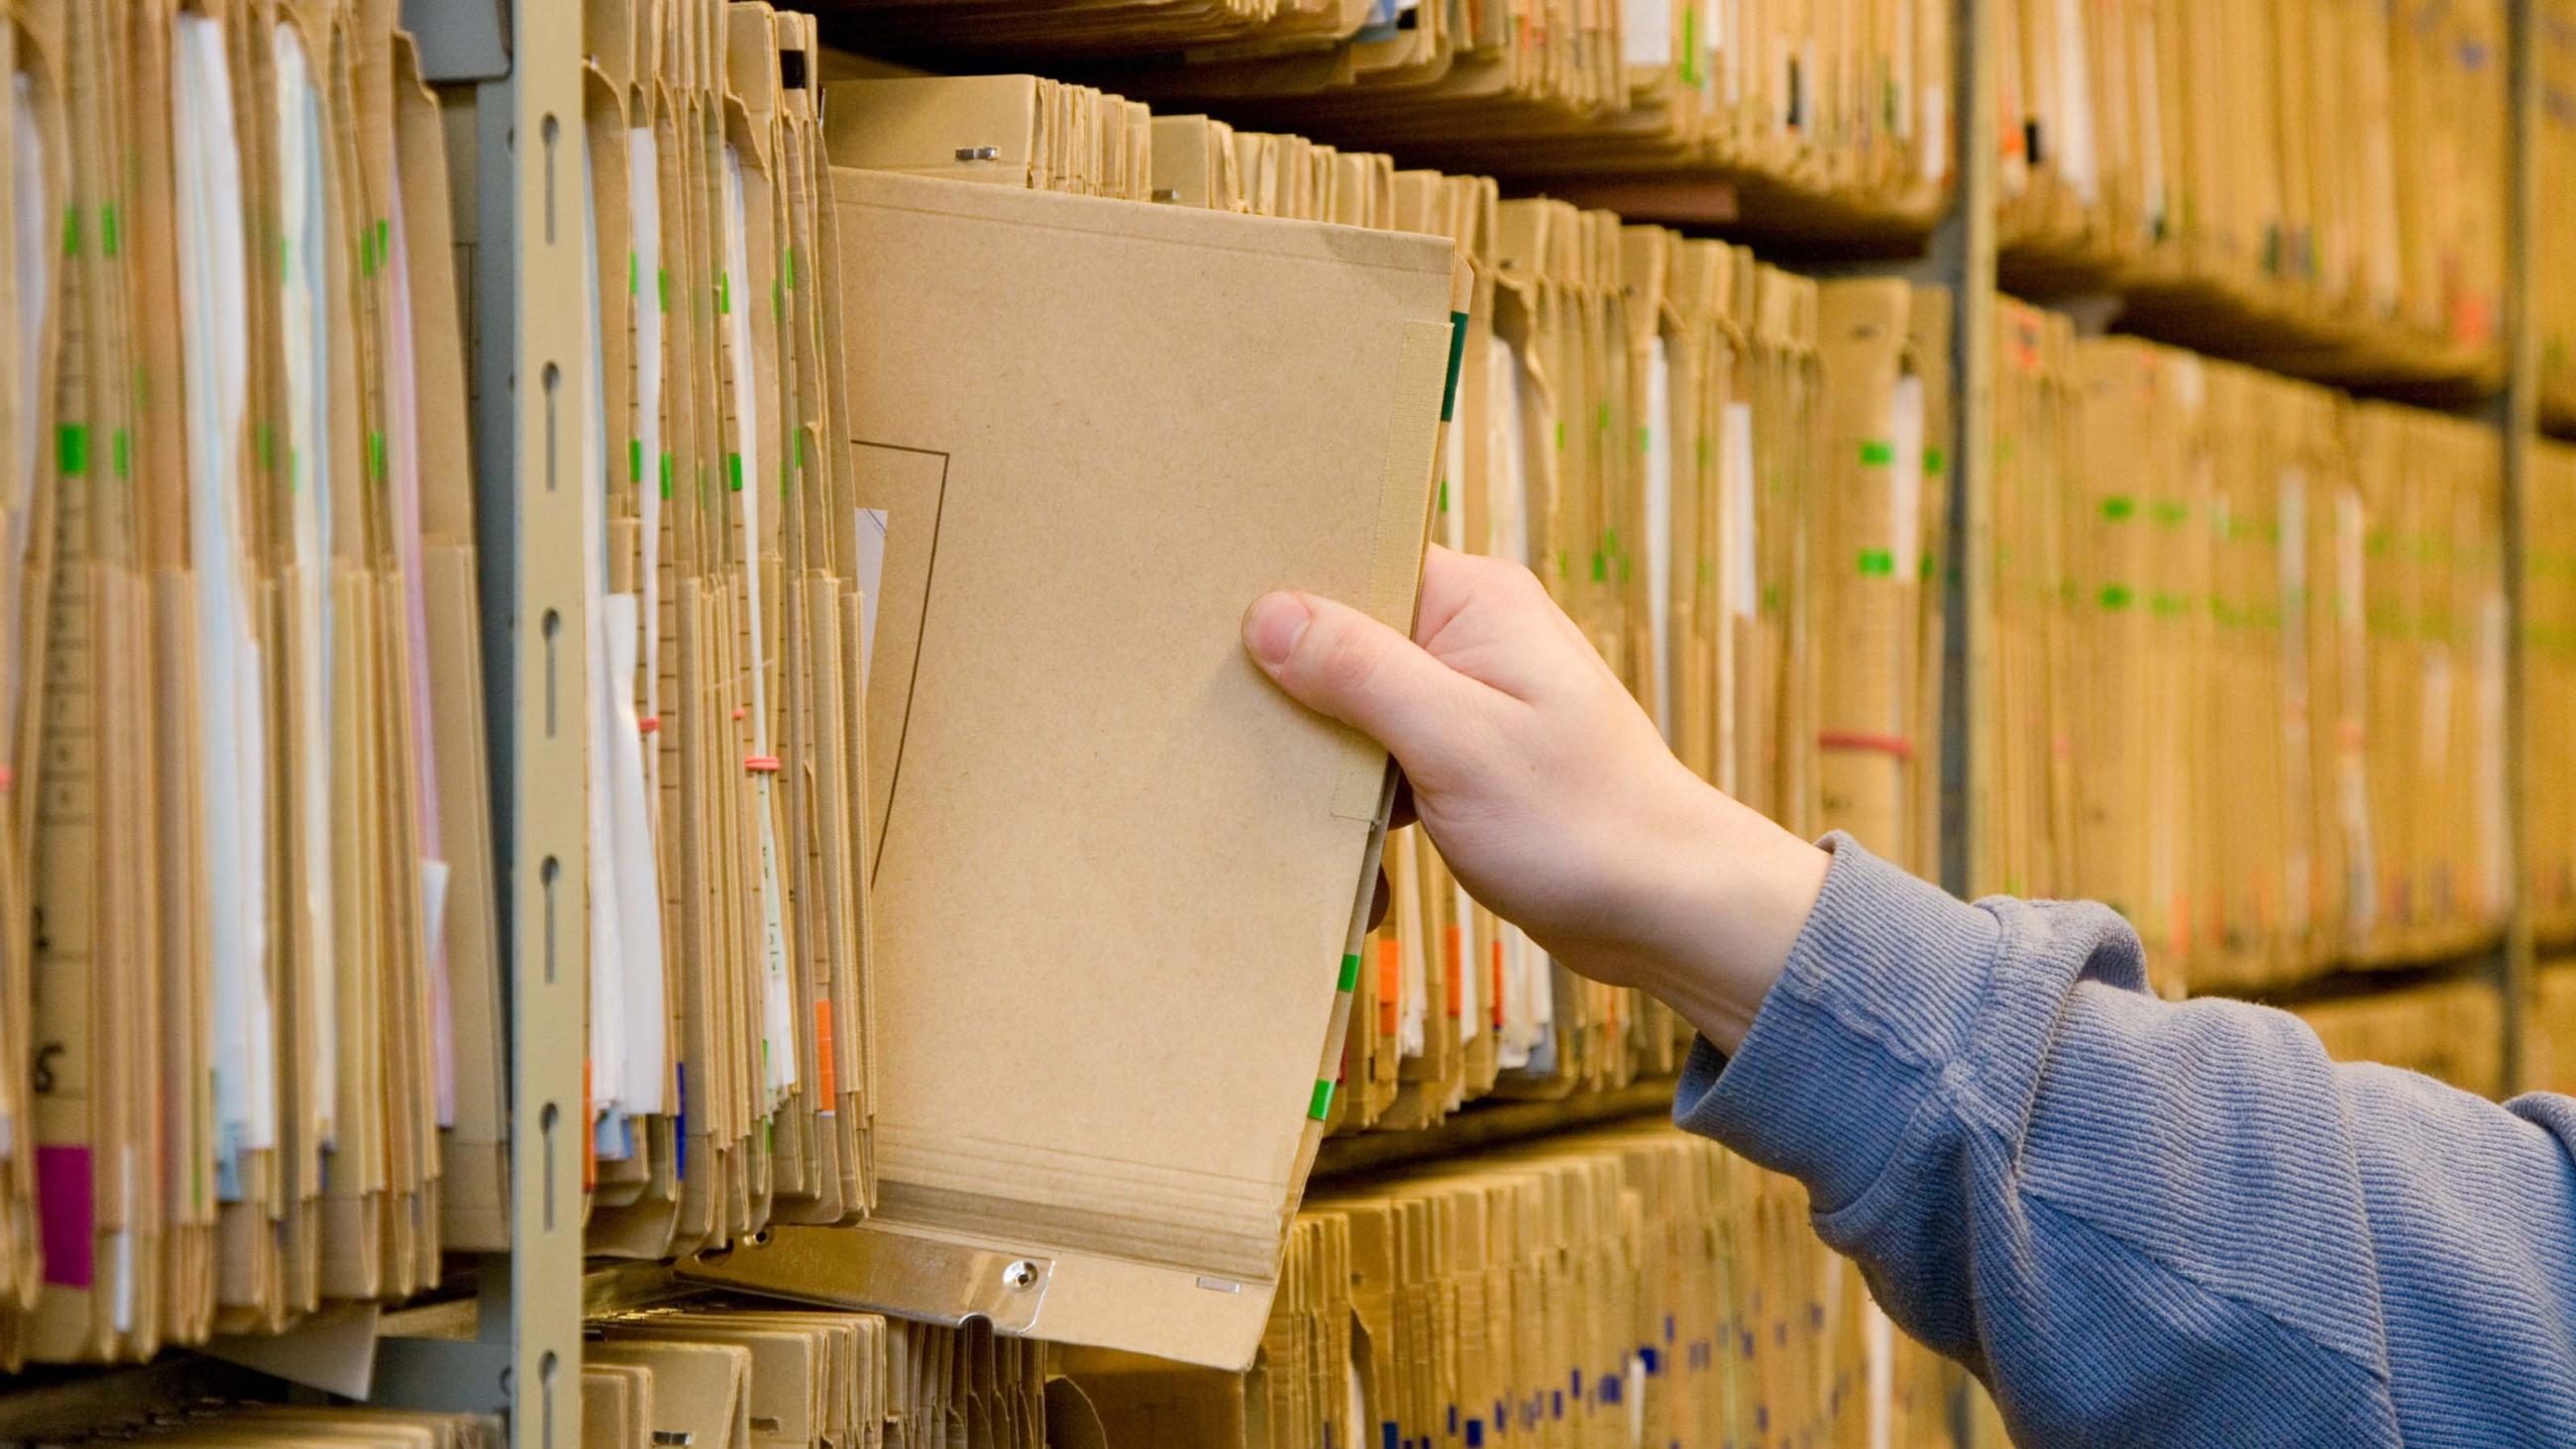 Archives in the Information Age